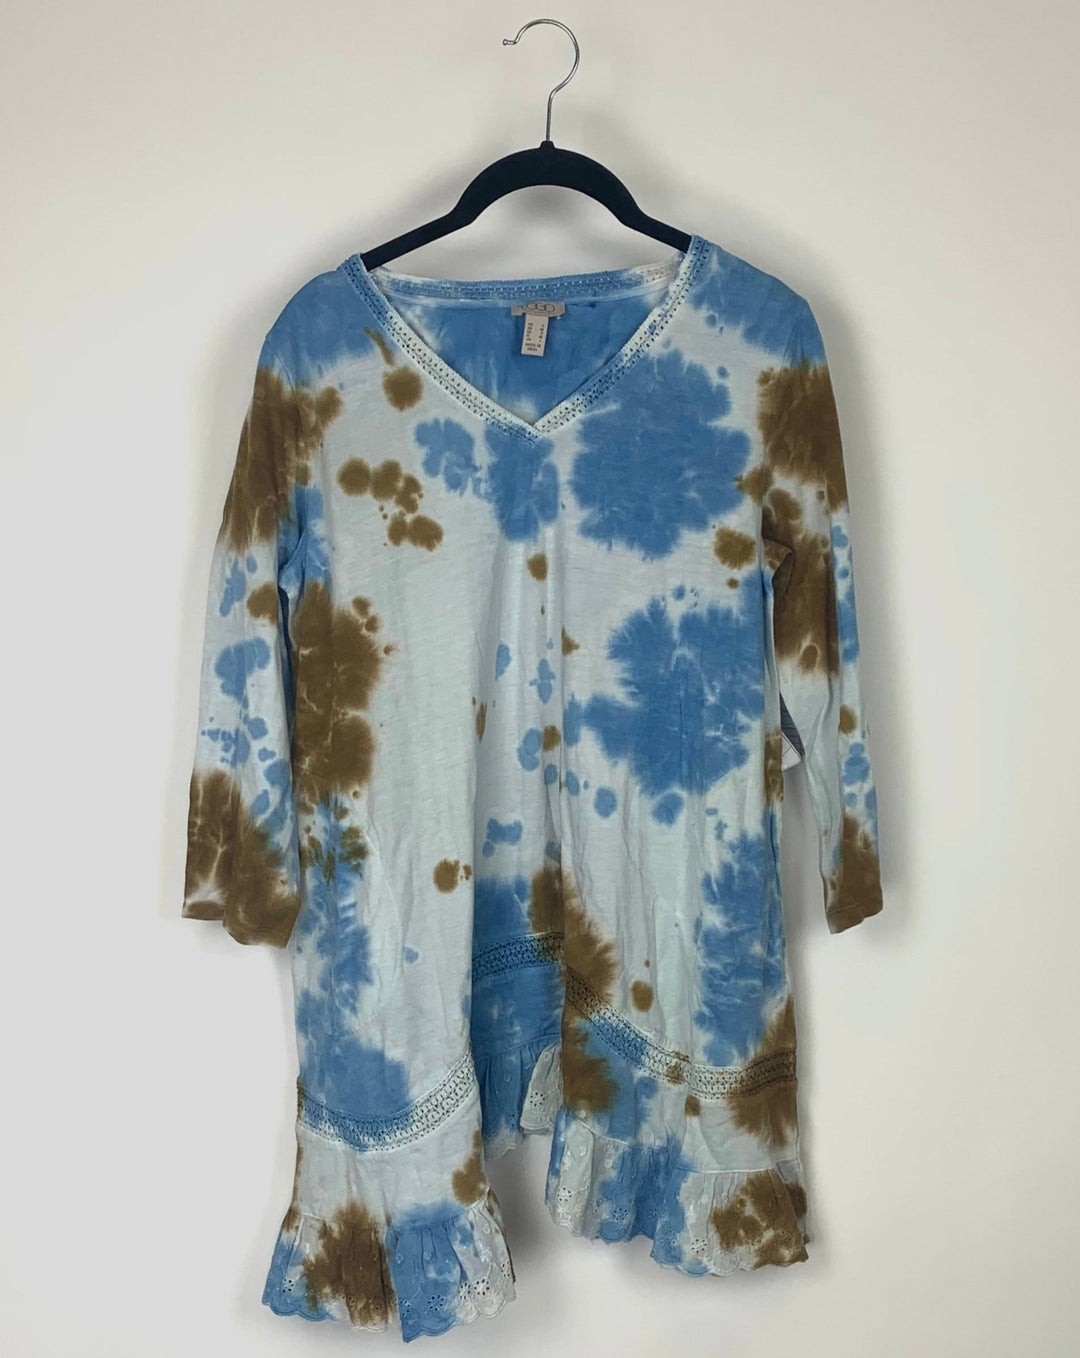 Blue and Brown Tie Dye Top - Small